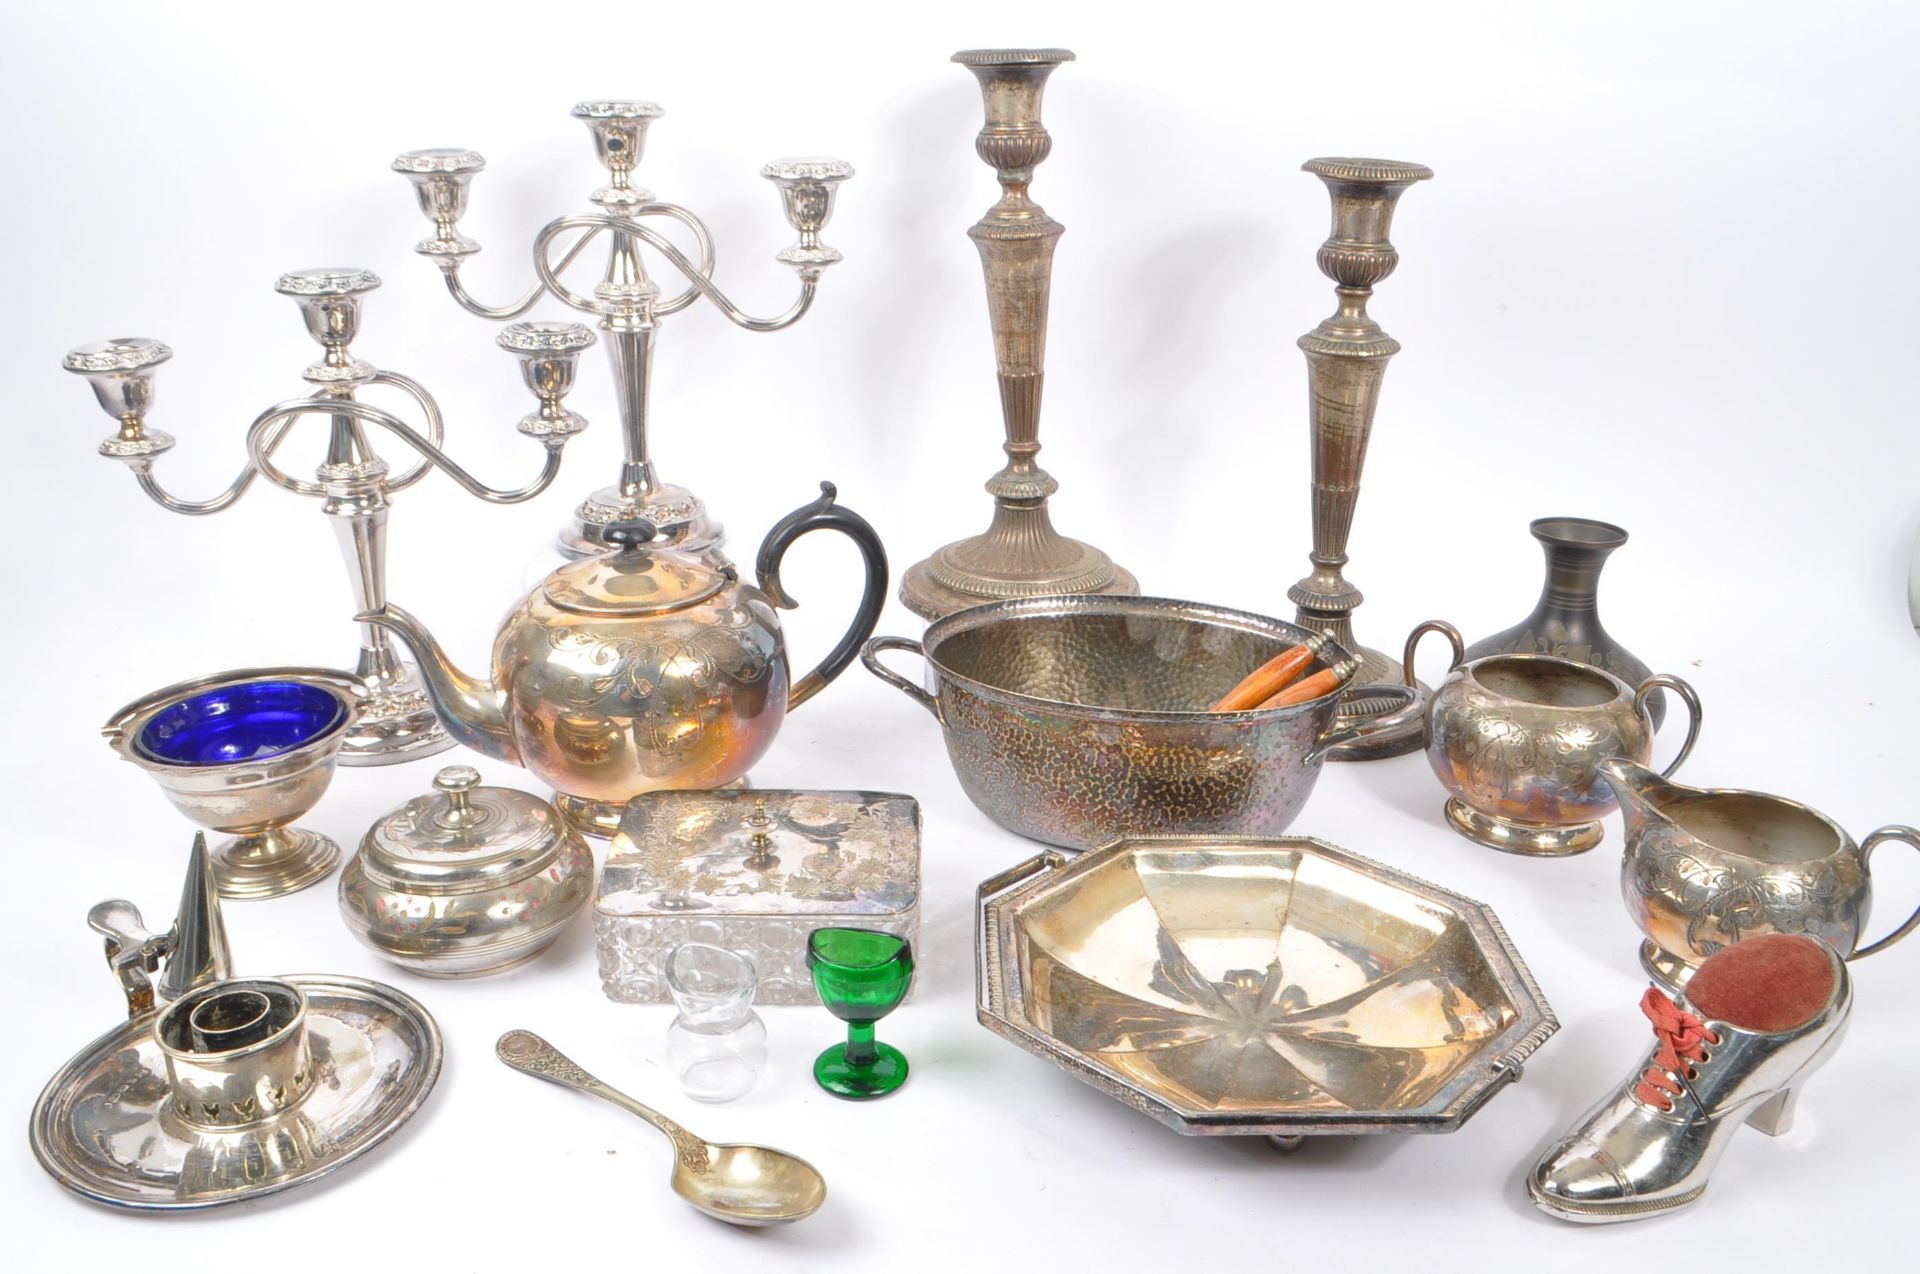 COLLECTION OF SILVER PLATE TABLEWARE & CURIOS